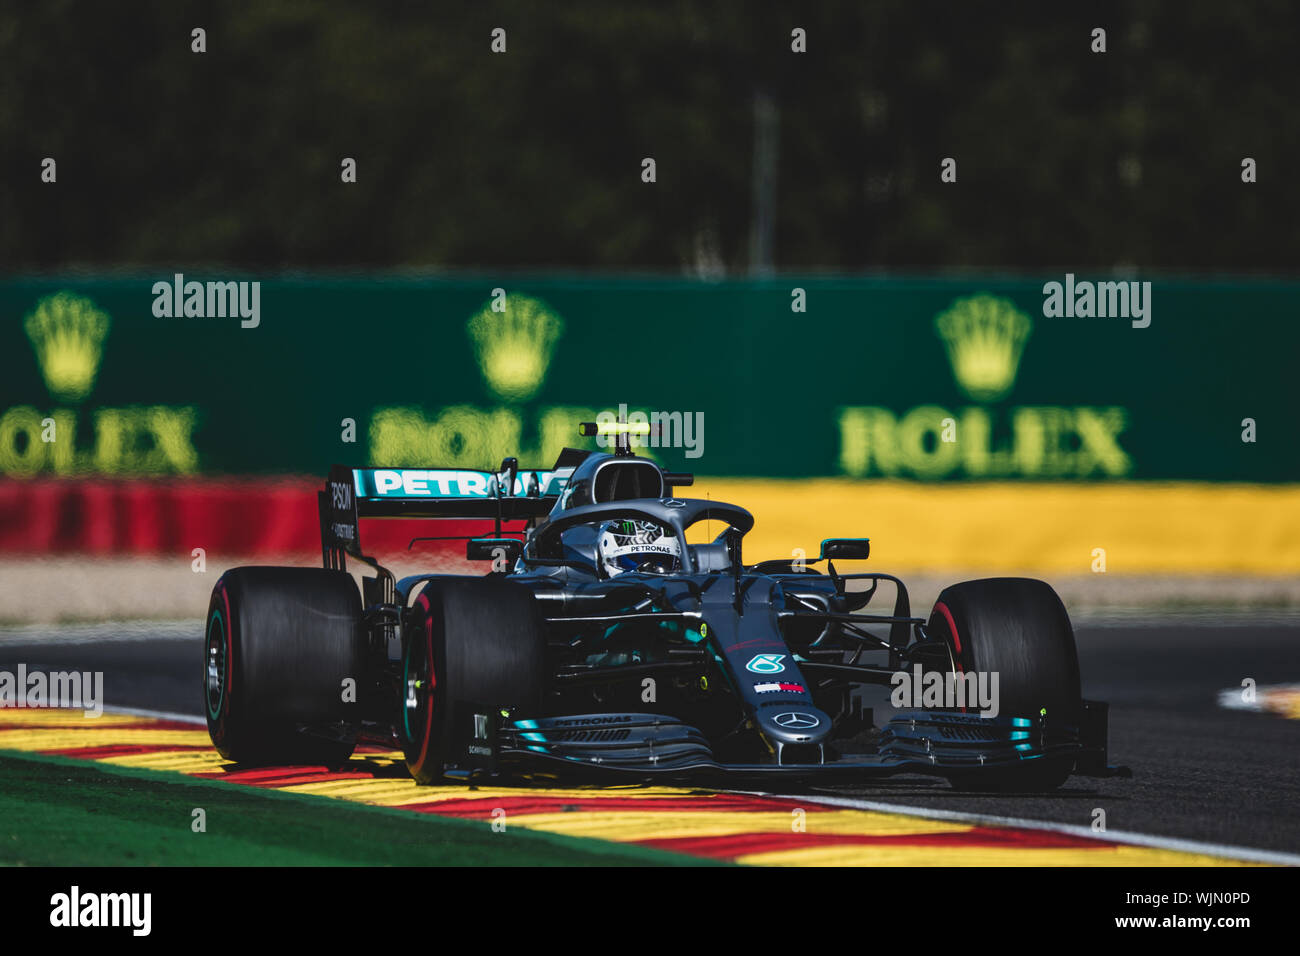 #77, Valterri Bottas, FIN, Mercedes, in action during the Belgian Grand Prix at Spa Francorchamps Stock Photo